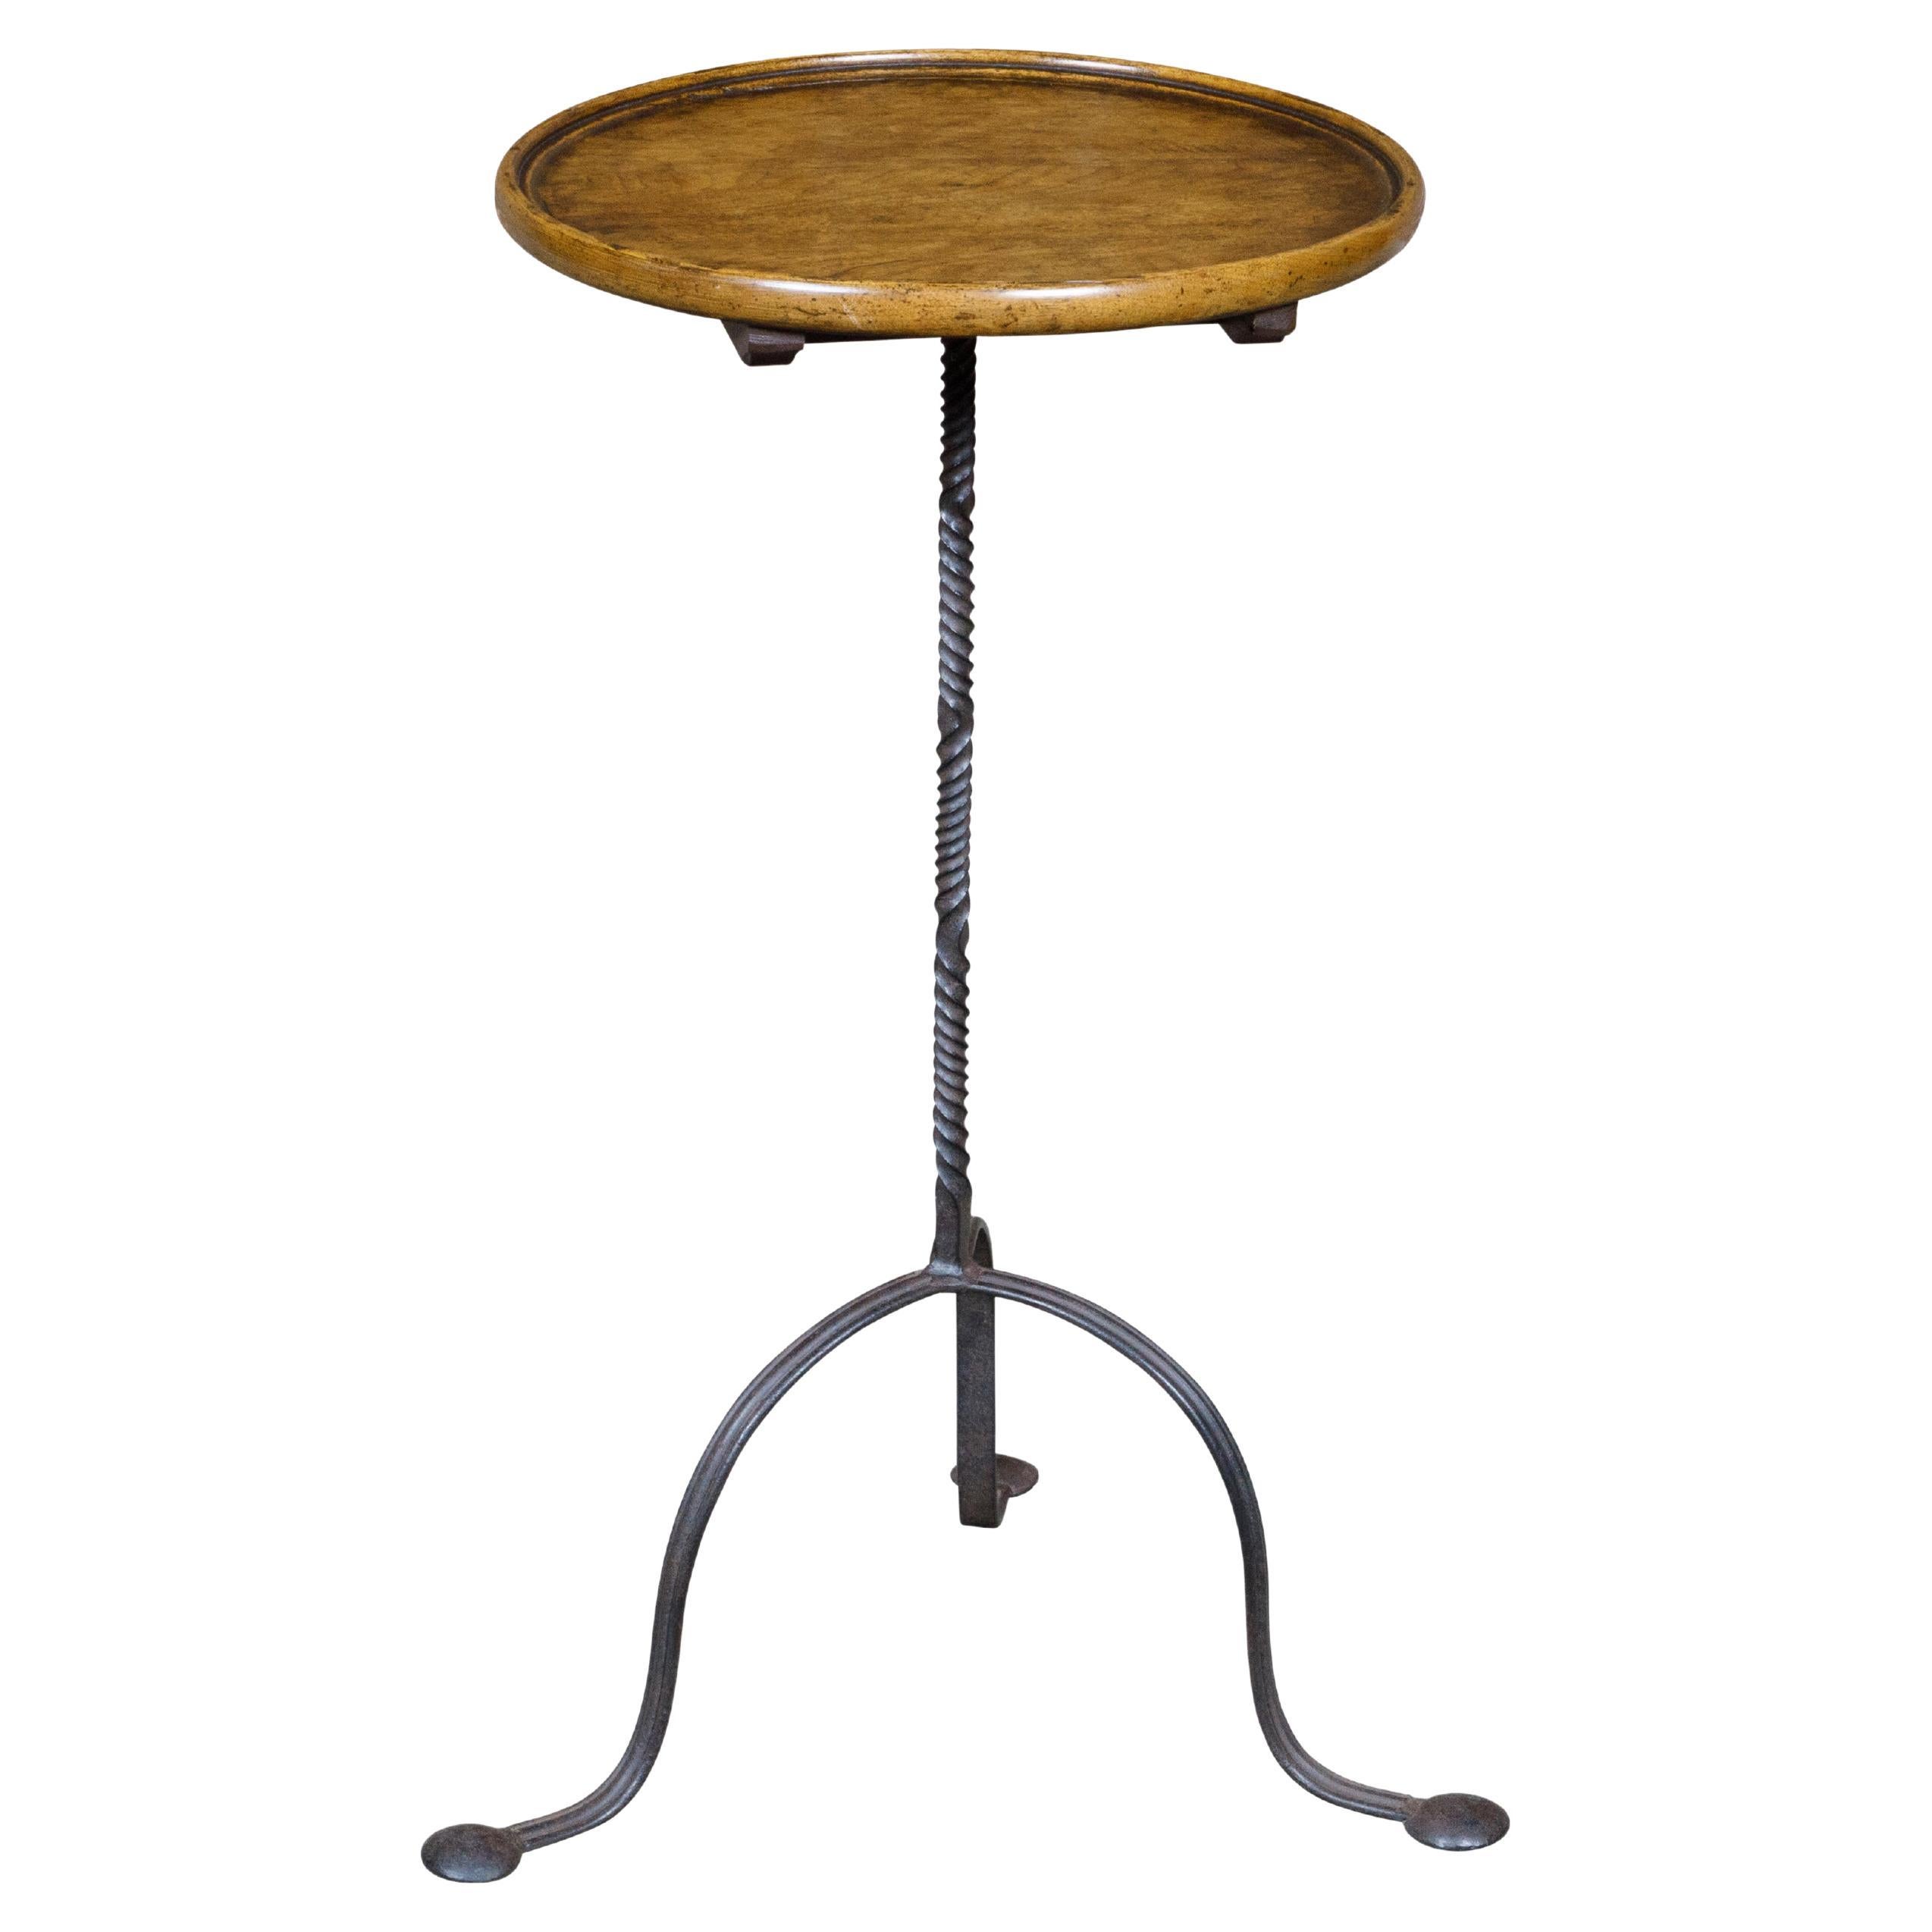 French 1920s Side Table with Round Wooden Tray Top and Iron Base